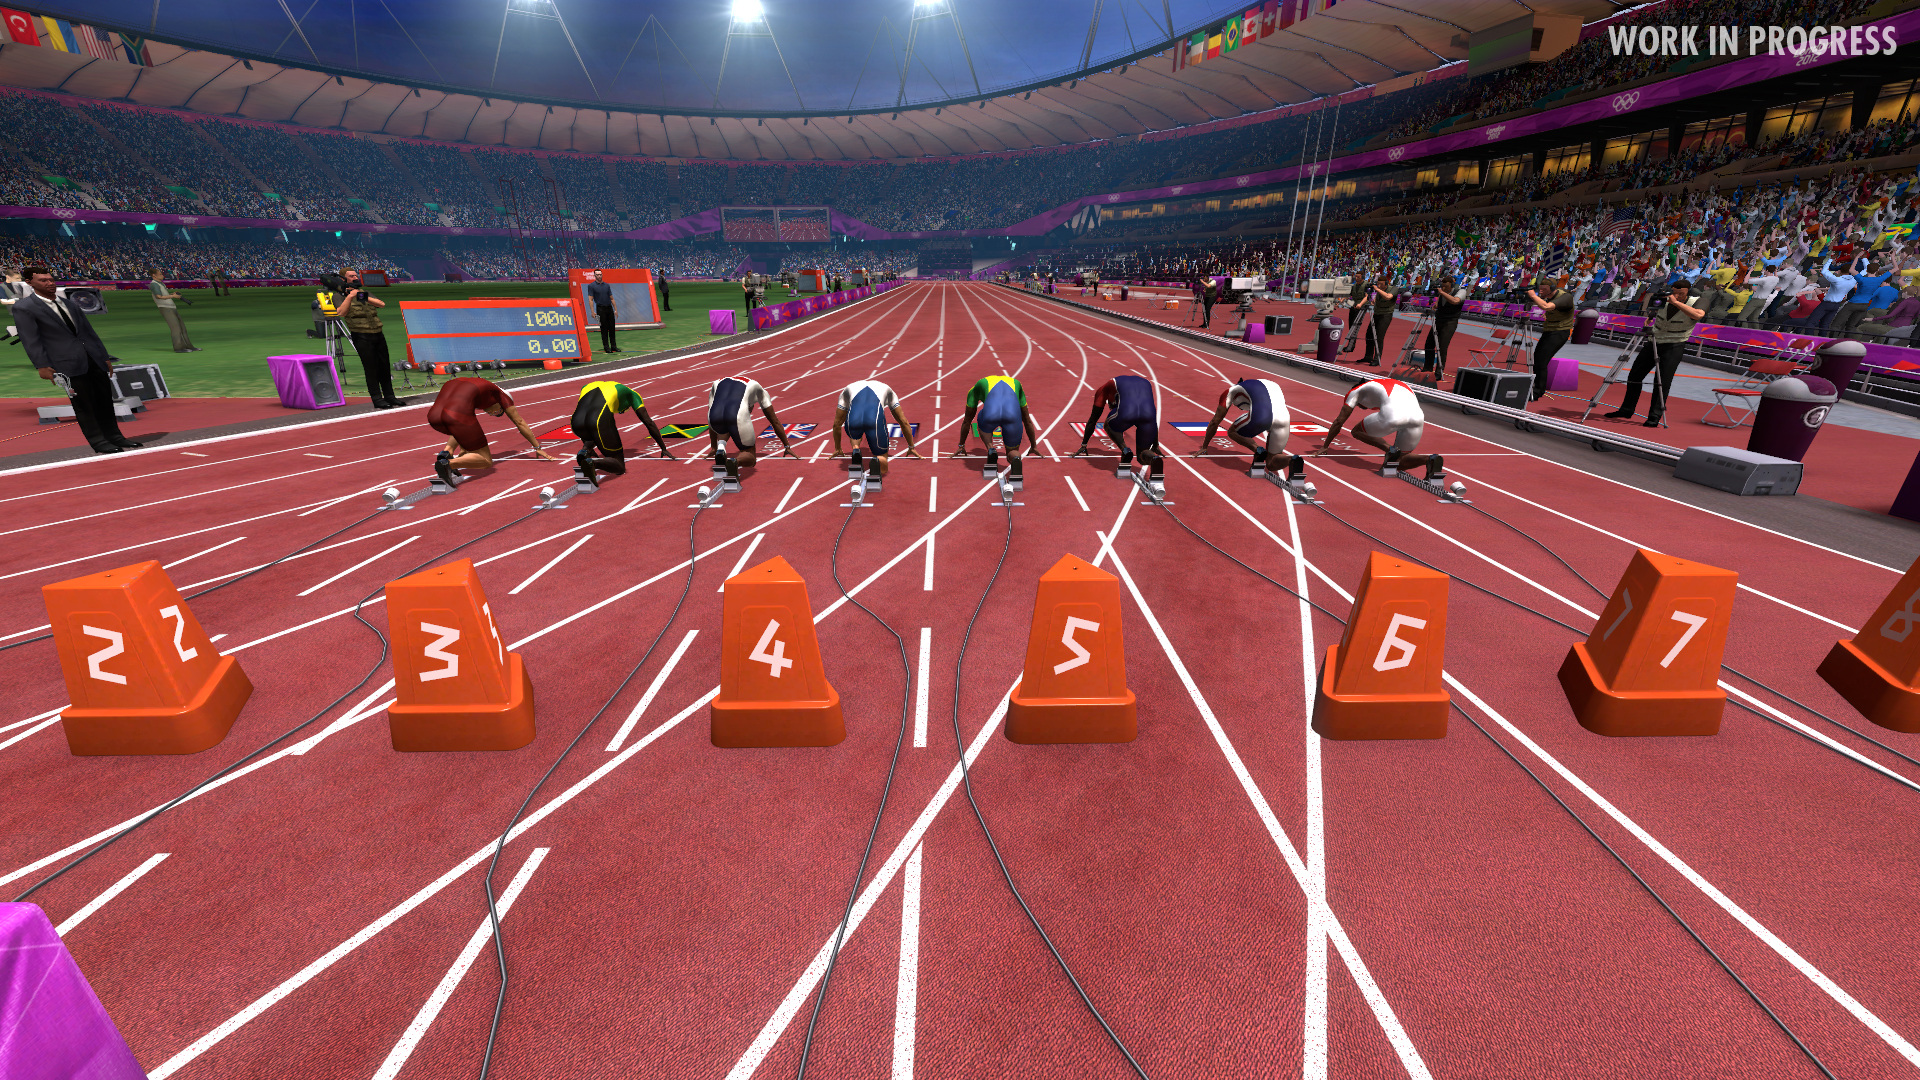 london 2012 olympics pc game crack download